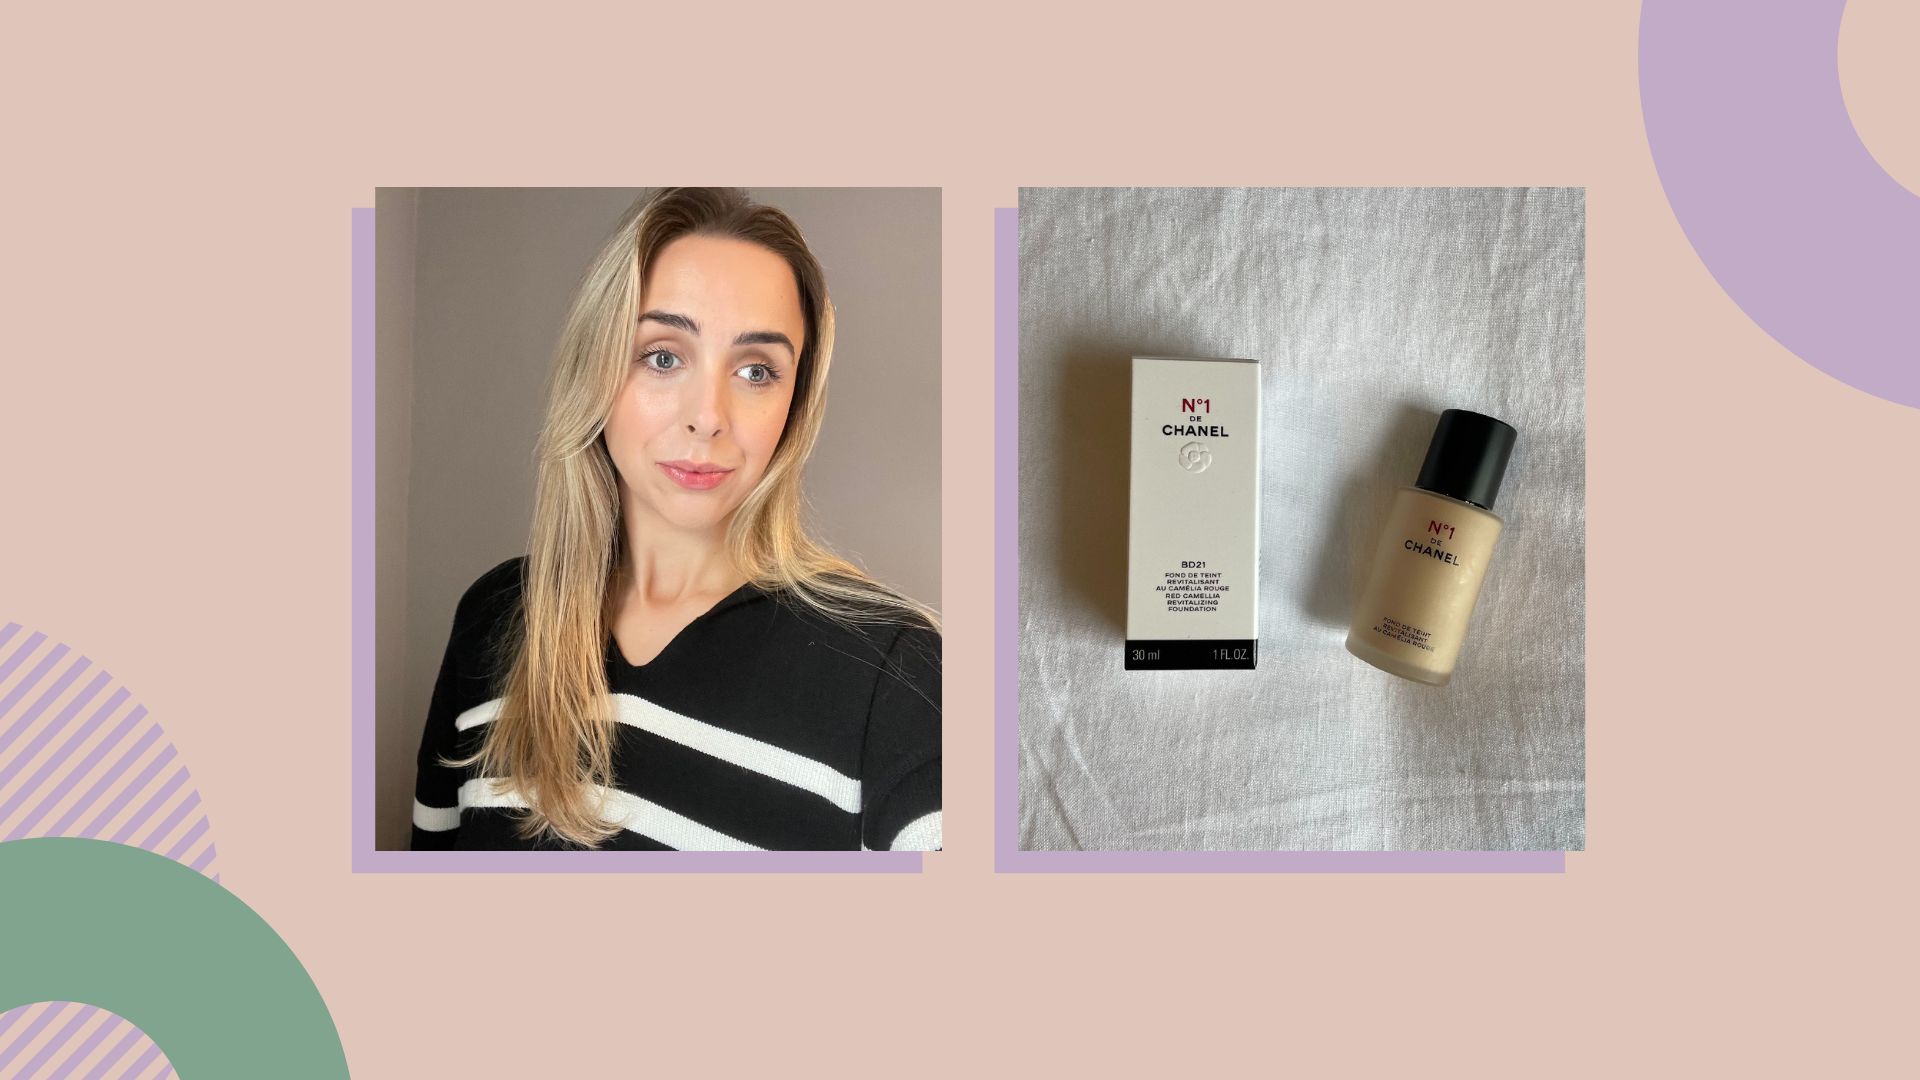 No 1 de Chanel Revitalising Foundation, Review and Wear Test